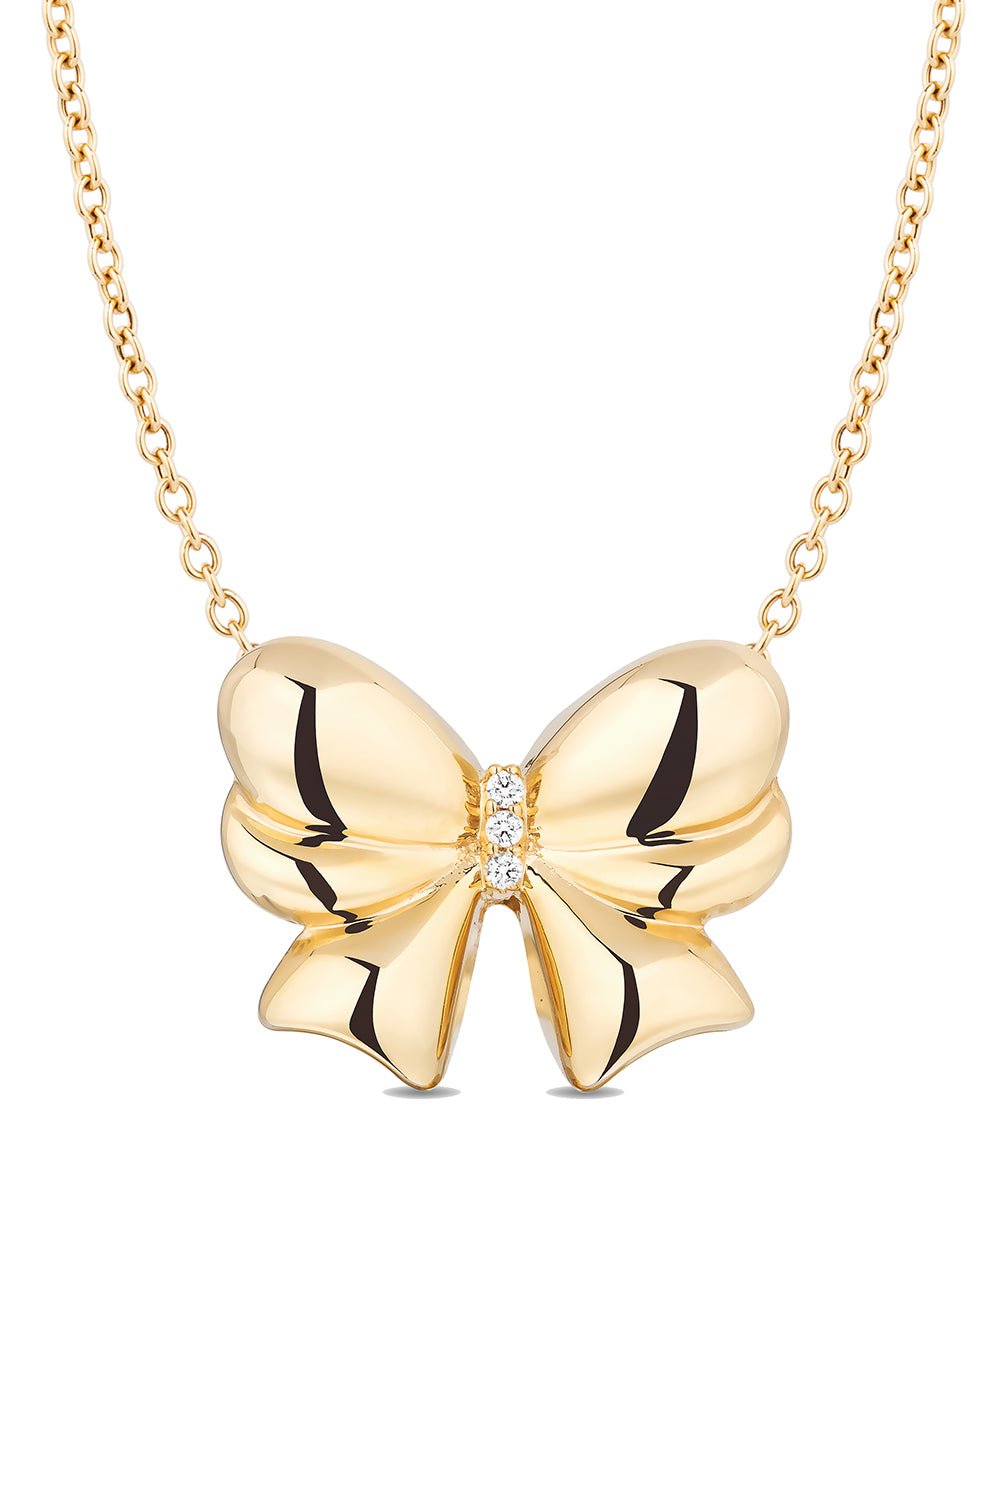 MASON & BOOKS-Evie Bow Necklace-YELLOW GOLD